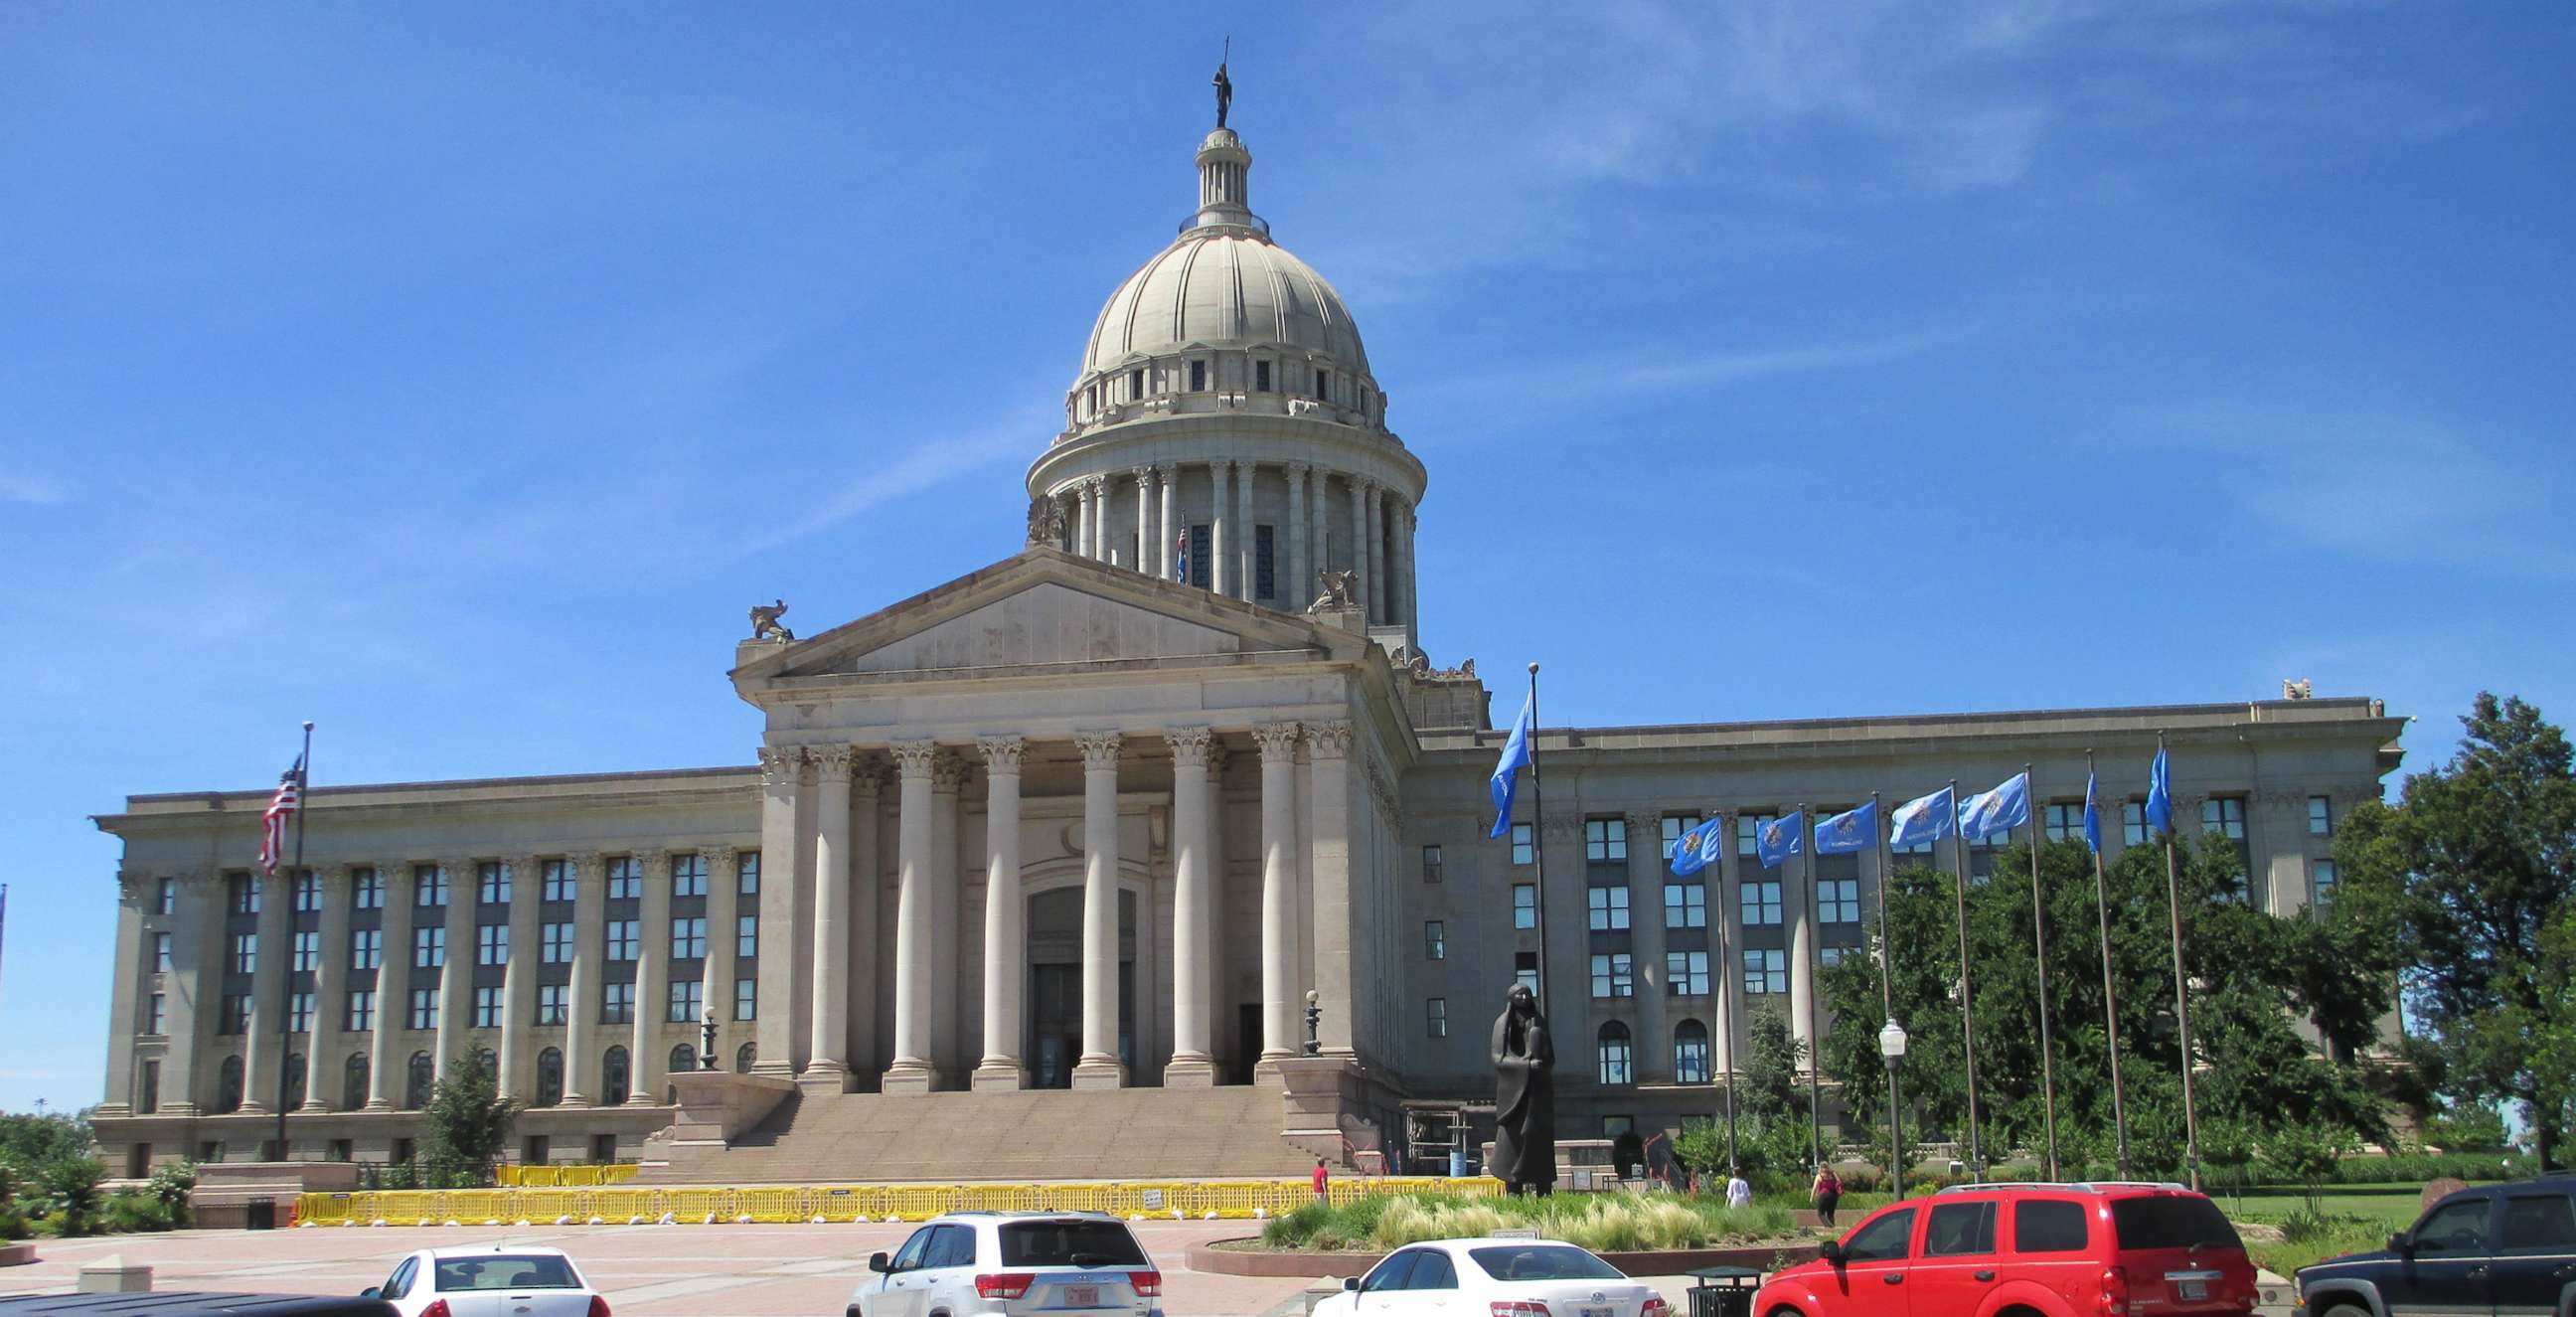 PHOTO: In this June 28, 2013, file photo, the Oklahoma State Capitol building is shown in Oklahoma City.